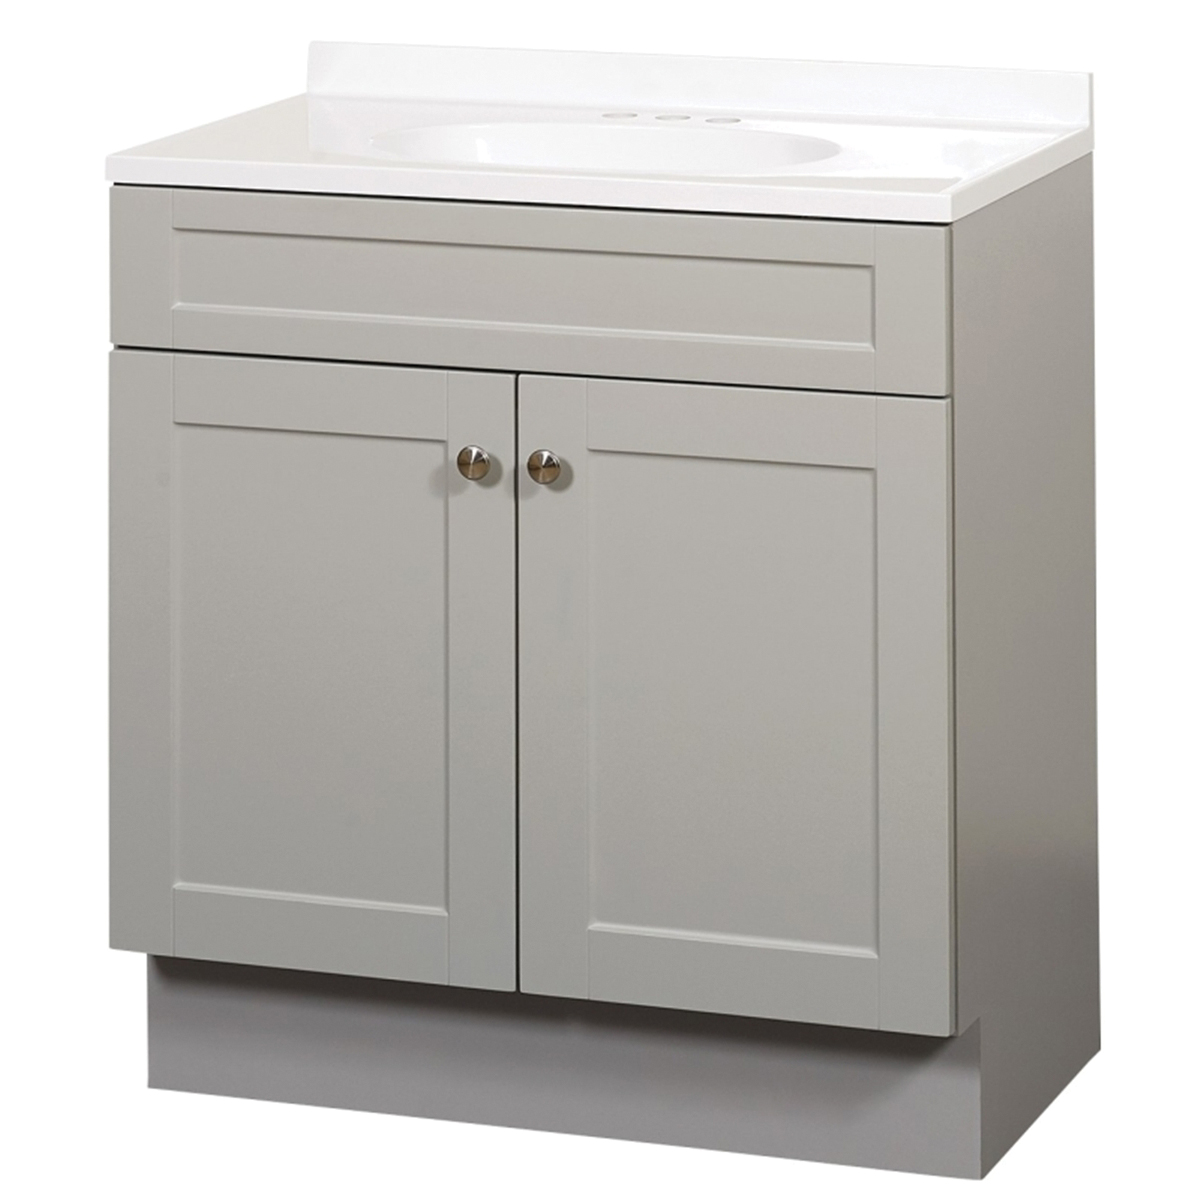 SBC30GY 2-Door Shaker Vanity with Top, Wood, Cool Gray, Cultured Marble Sink, White Sink